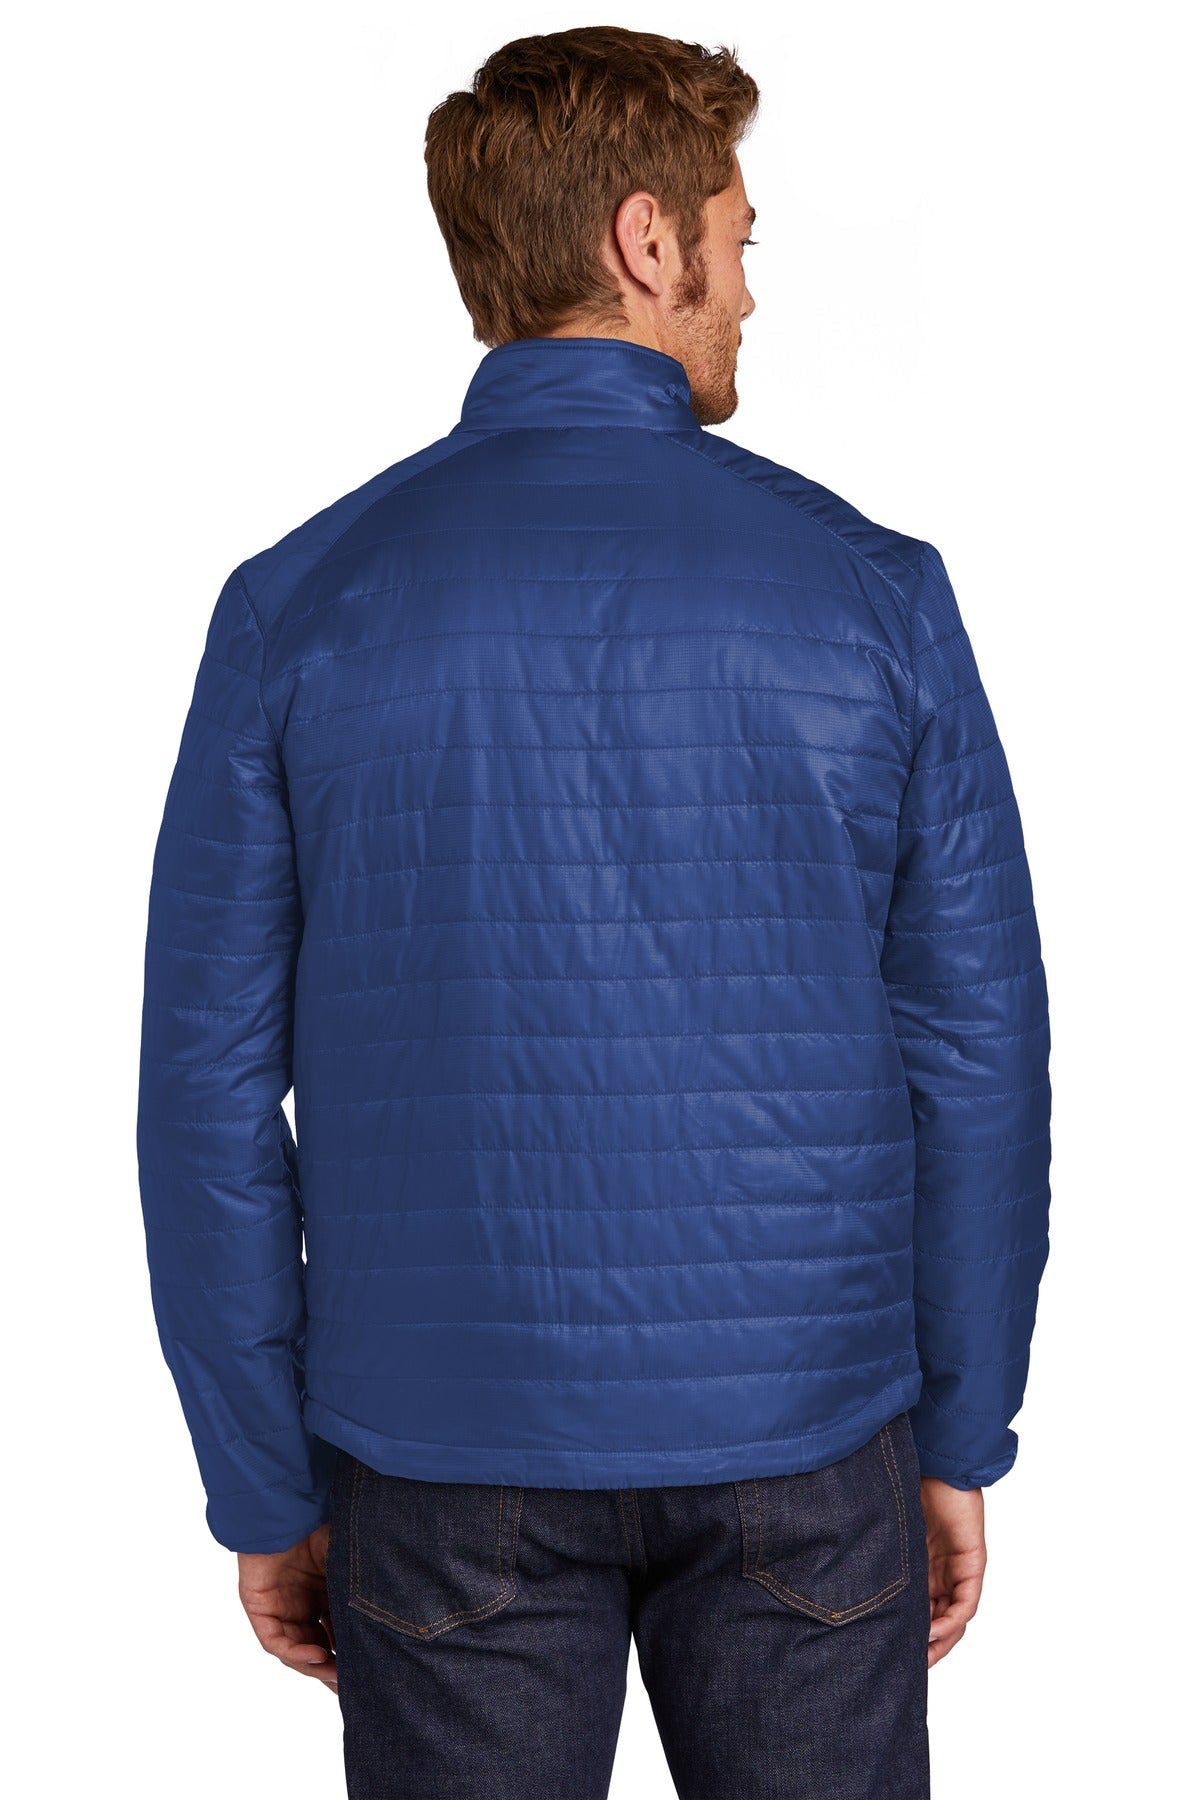 Port Authority ® Packable Puffy Jacket J850 - DFW Impression